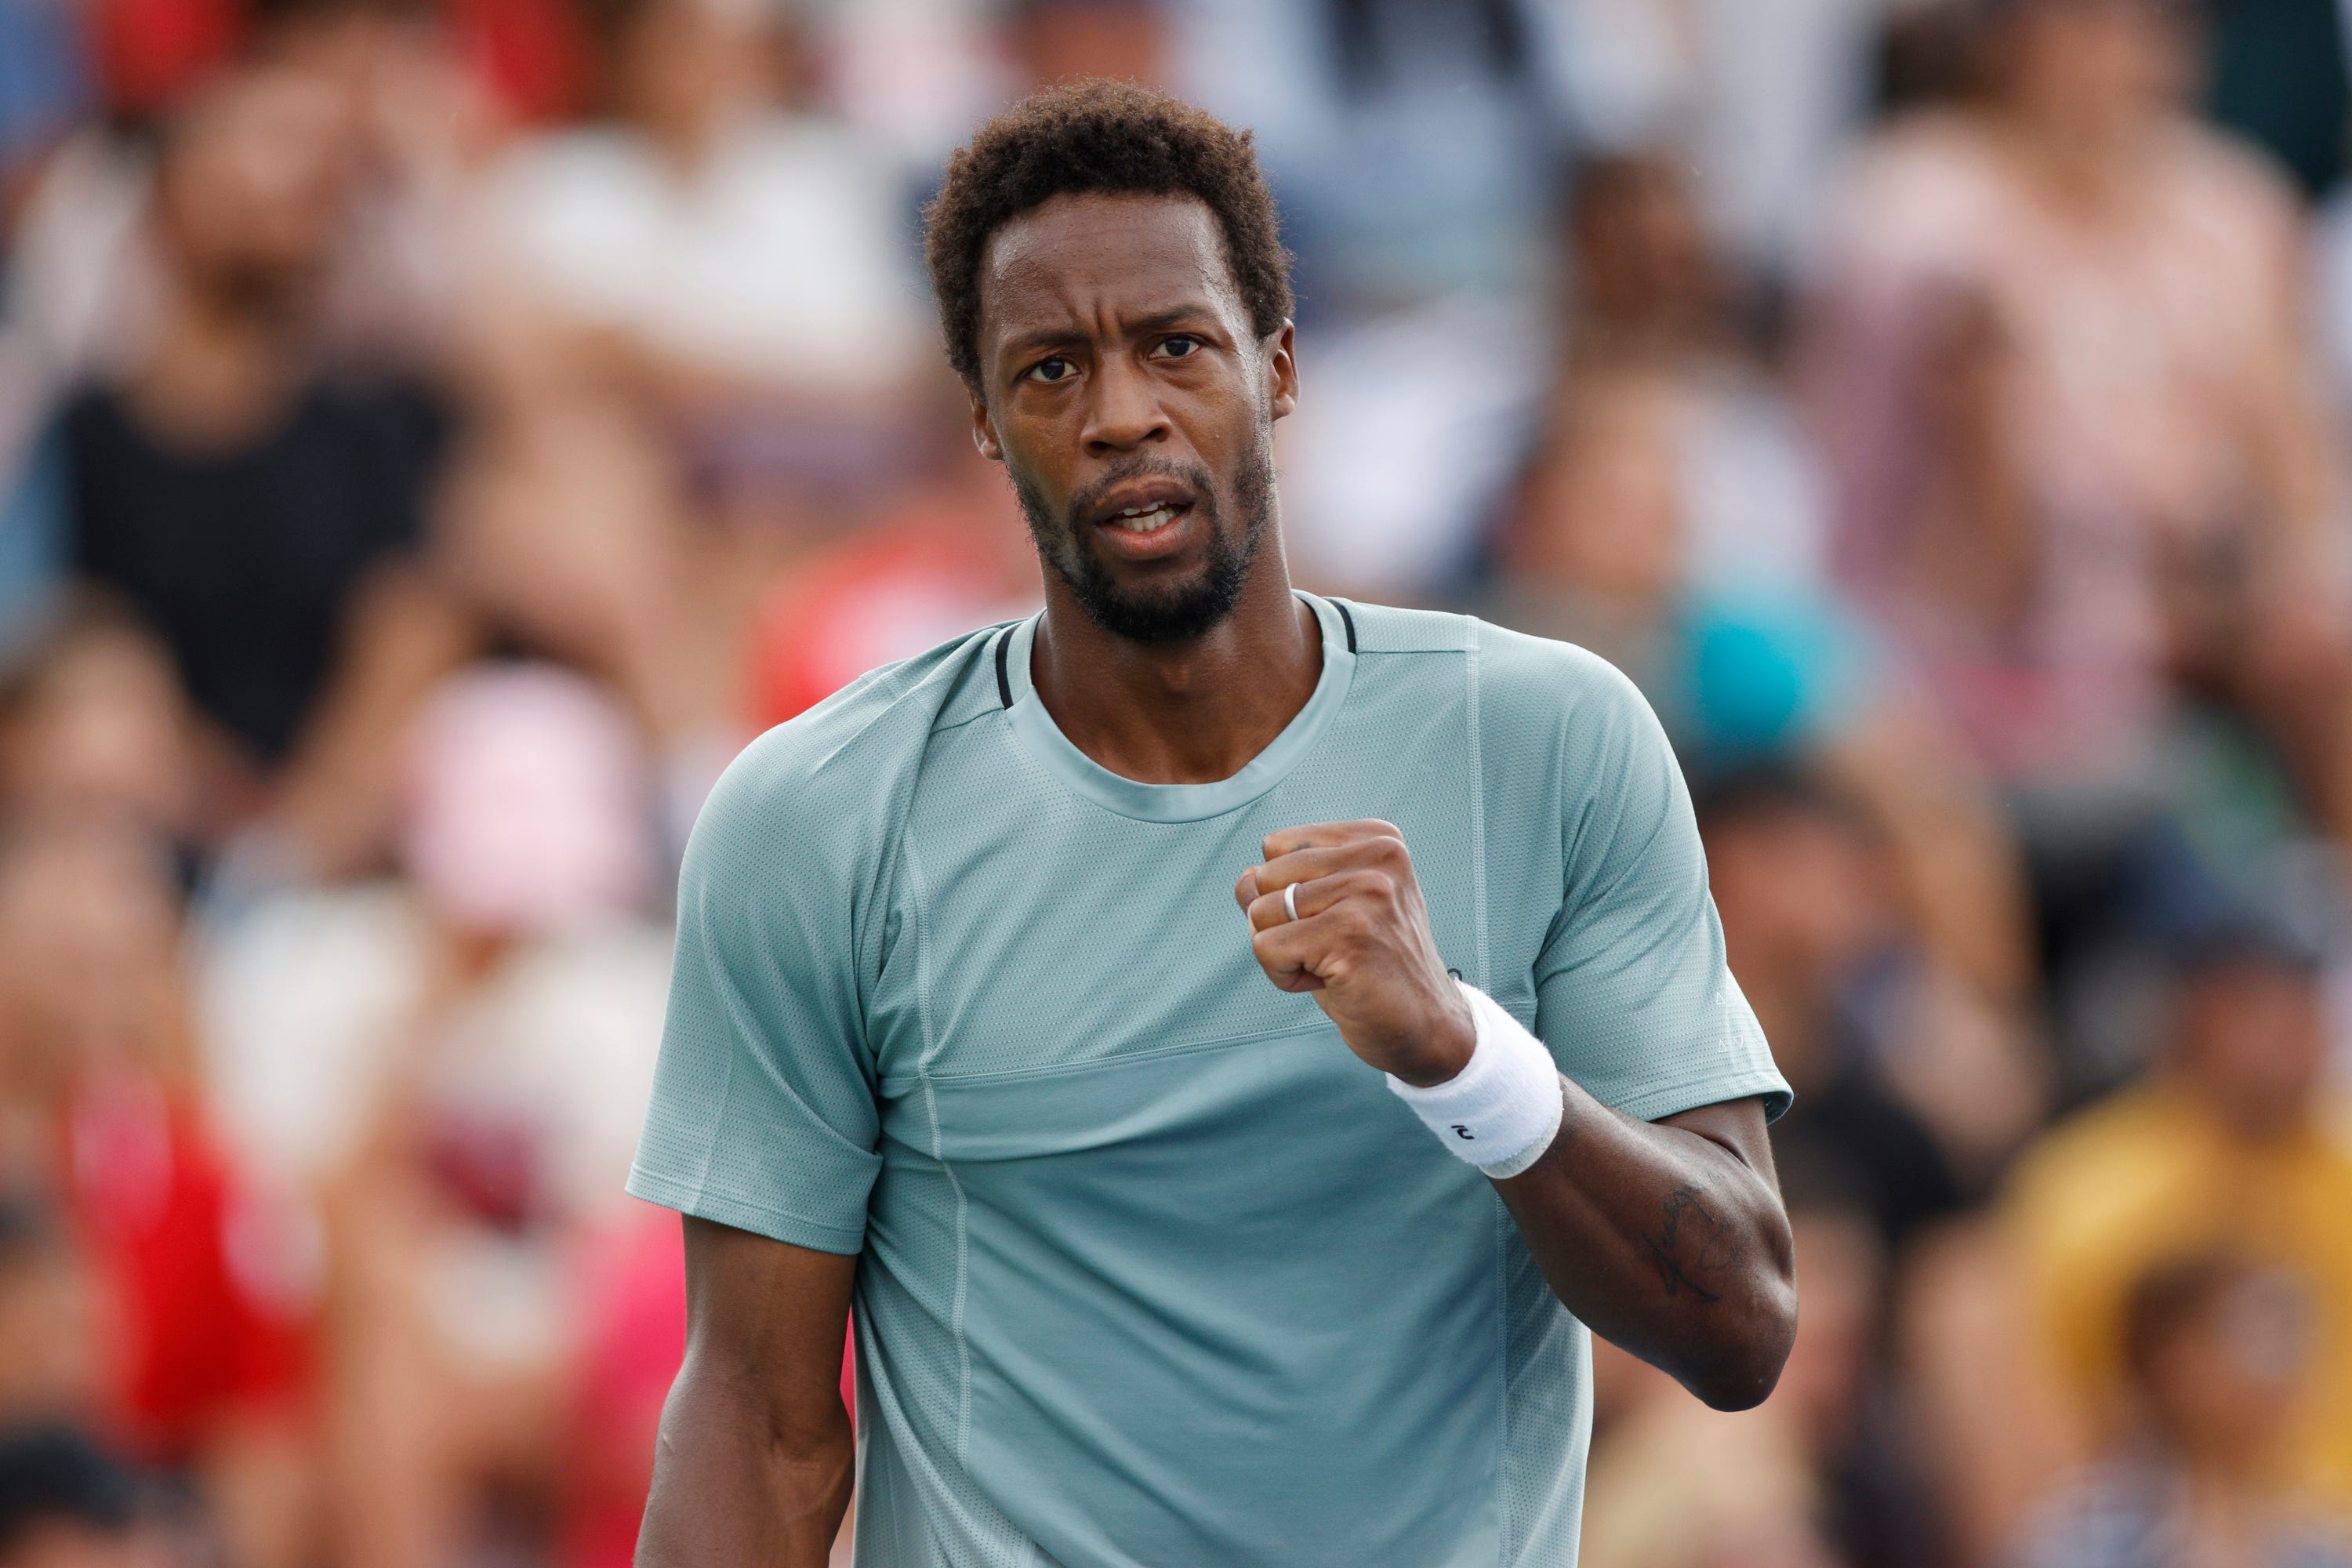 Gael Monfils knocked out Stefanos Tsitsipas in Canada (Cole Burston/The Canadian Press via AP)